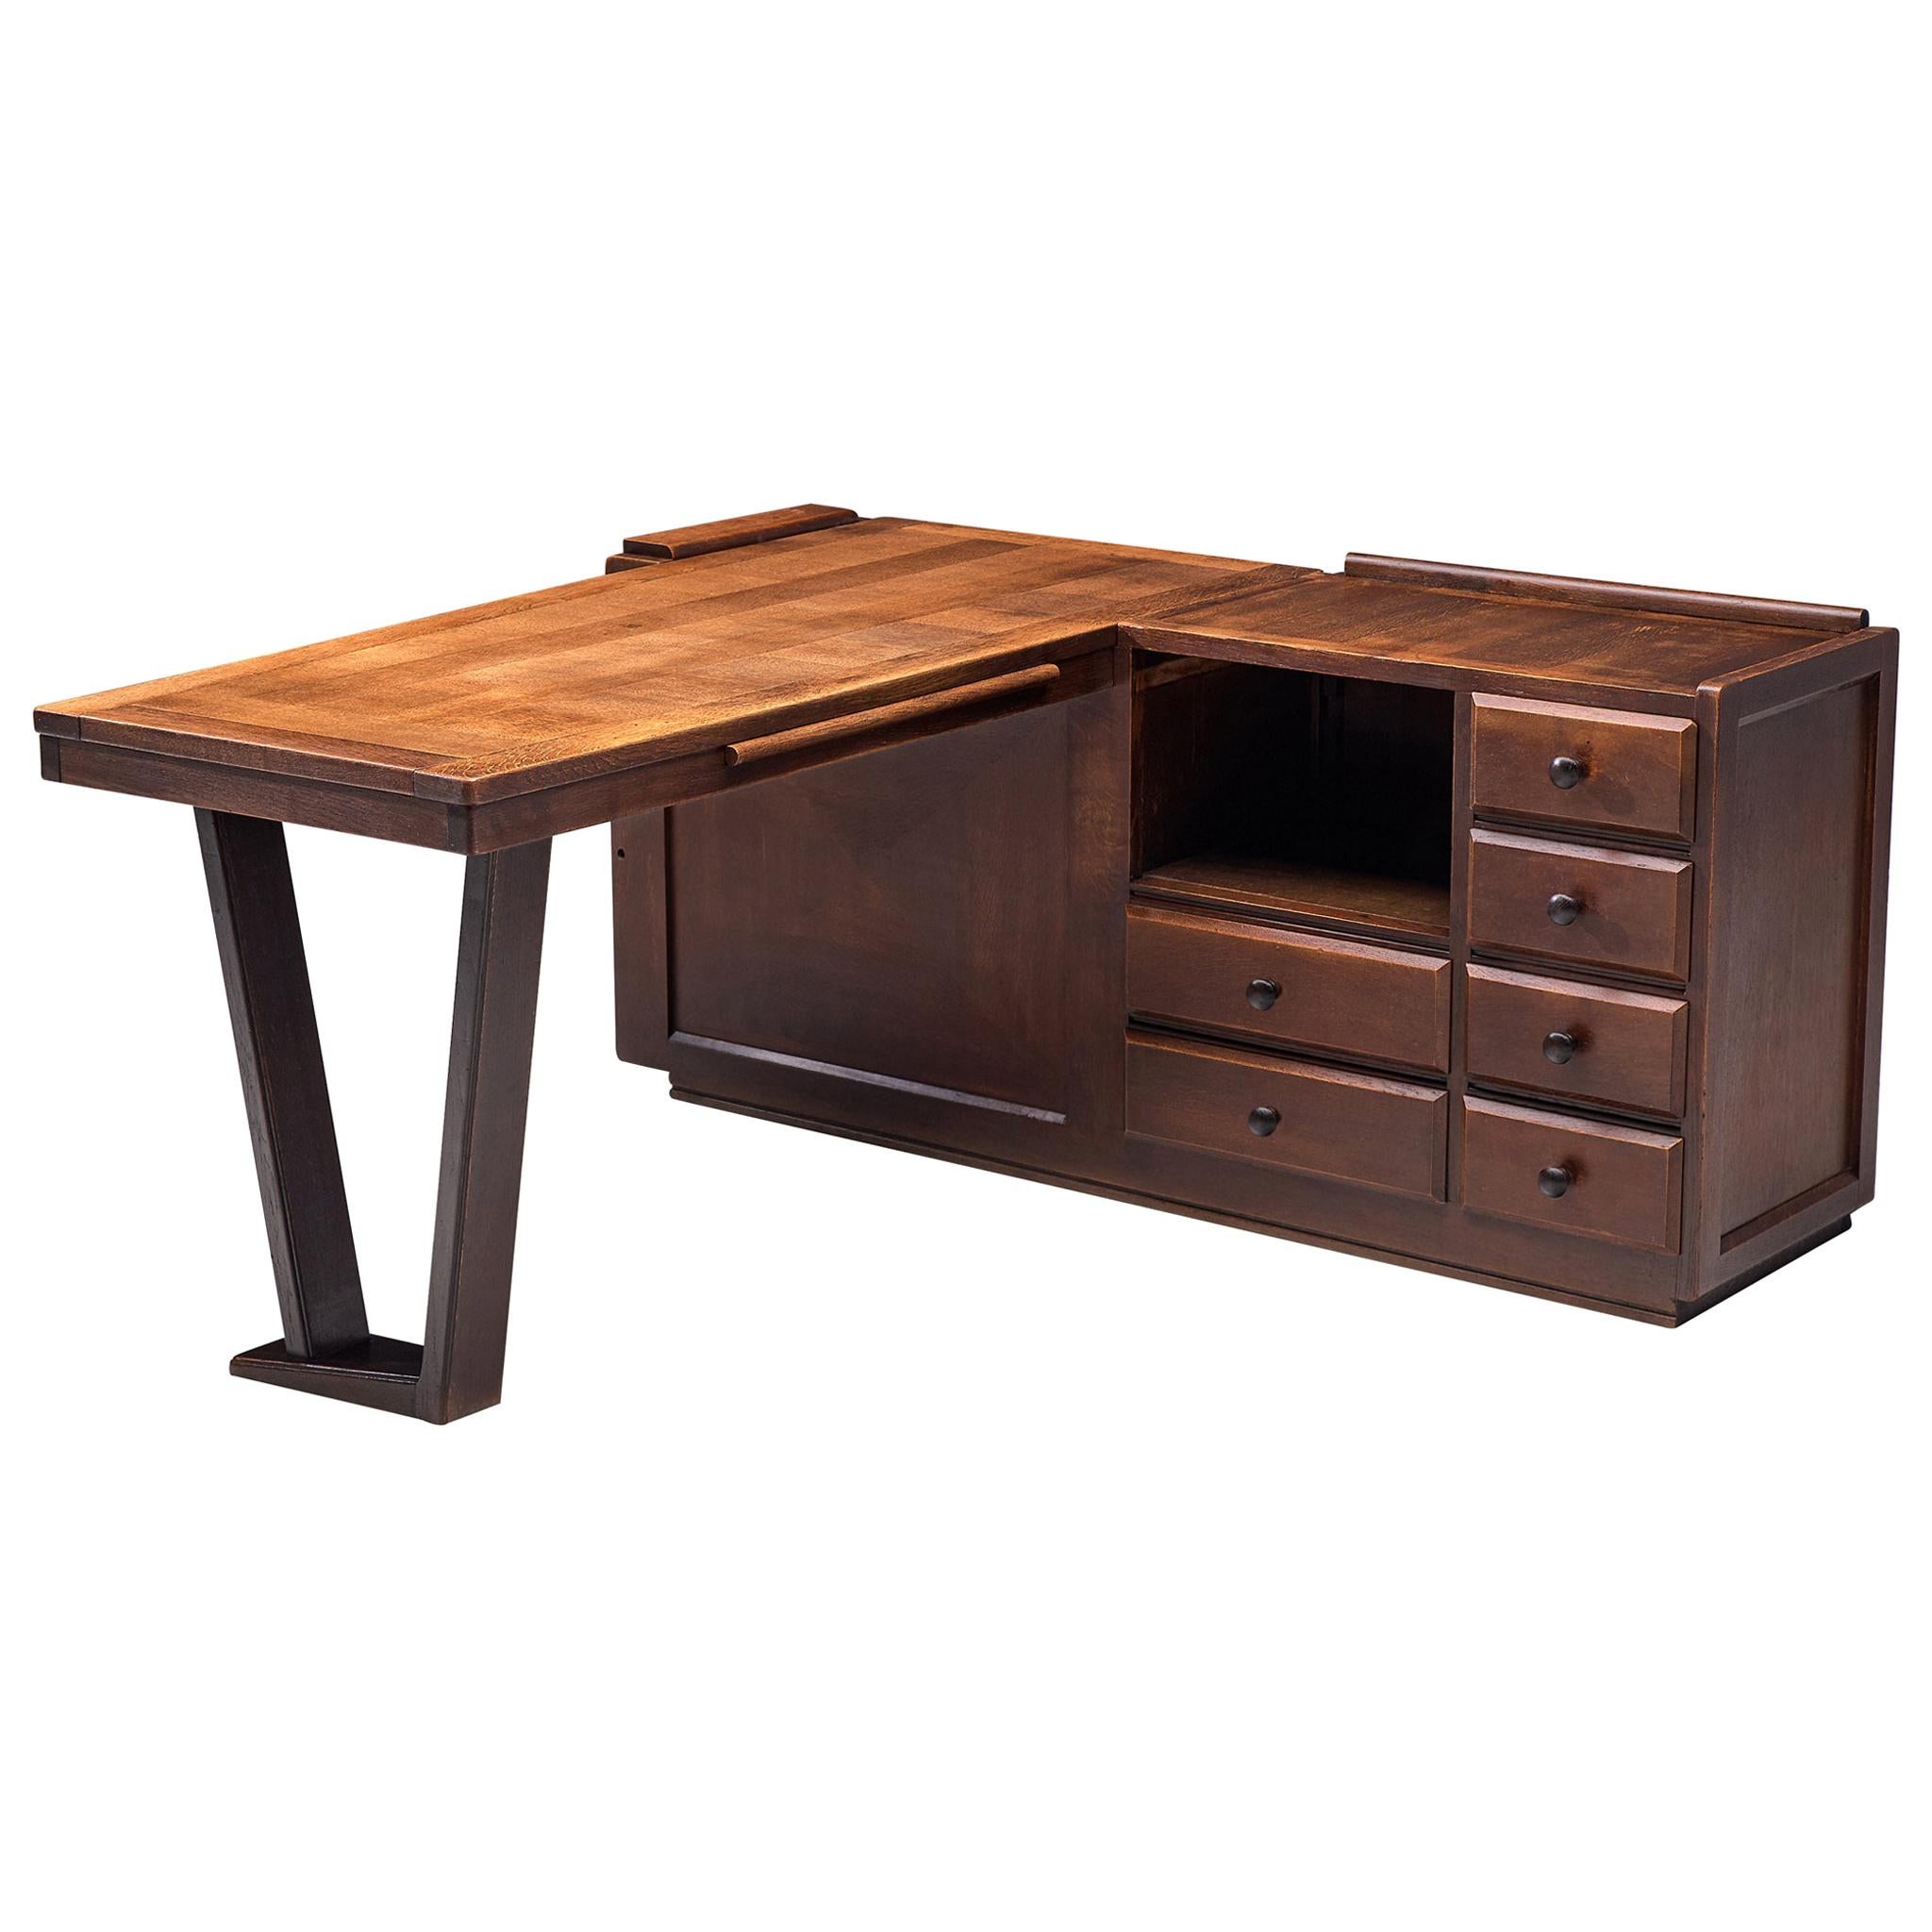 Guillerme et Chambron, corner desk, stained oak, France, 1950s

Corner desk by French designer duo Guillerme and Chambron. This executive desk shows the fine craftsmanship that characterizes the work of this designer duo. The desk consists out of